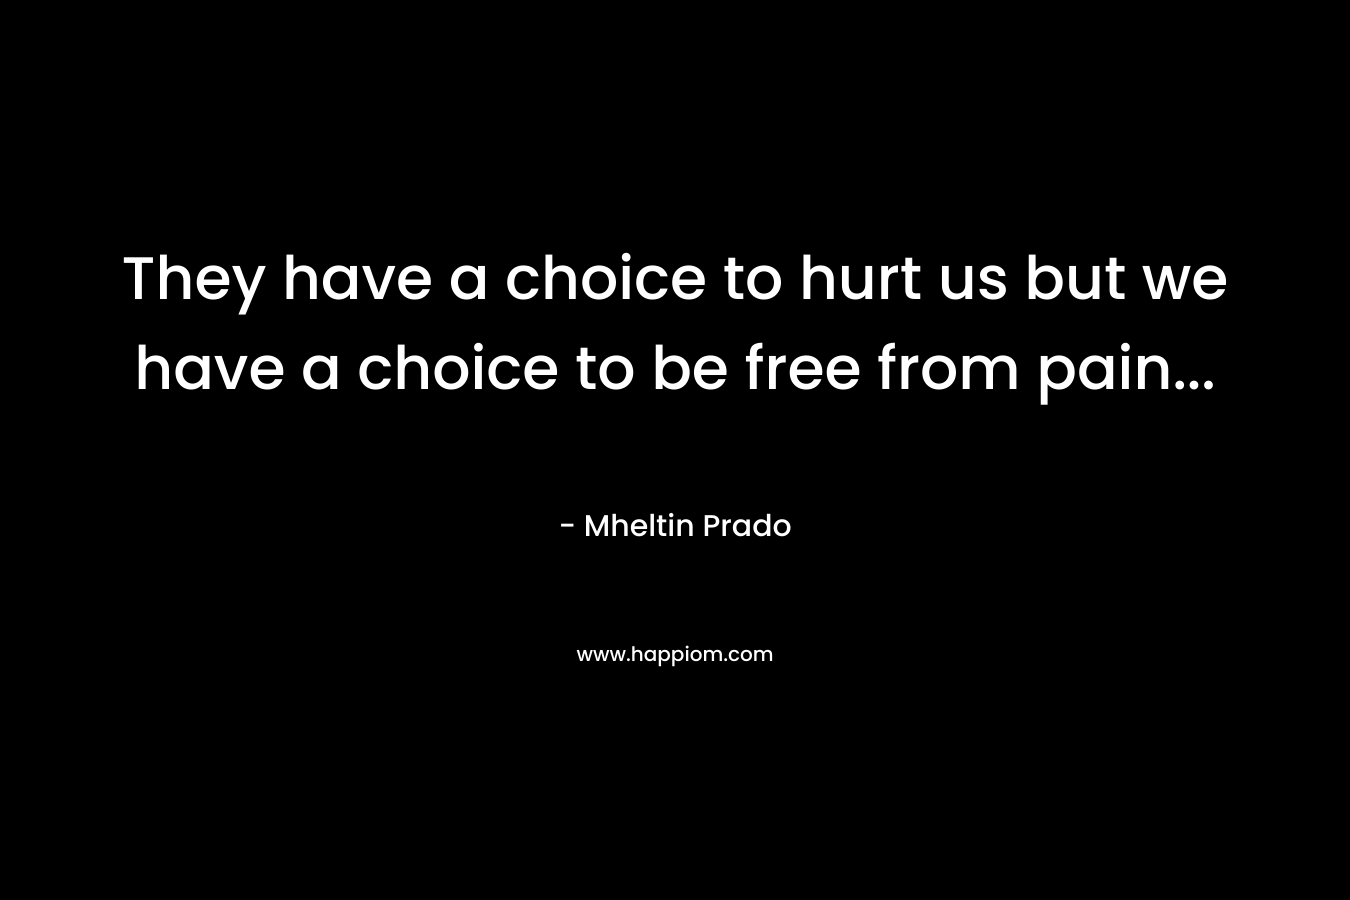 They have a choice to hurt us but we have a choice to be free from pain...